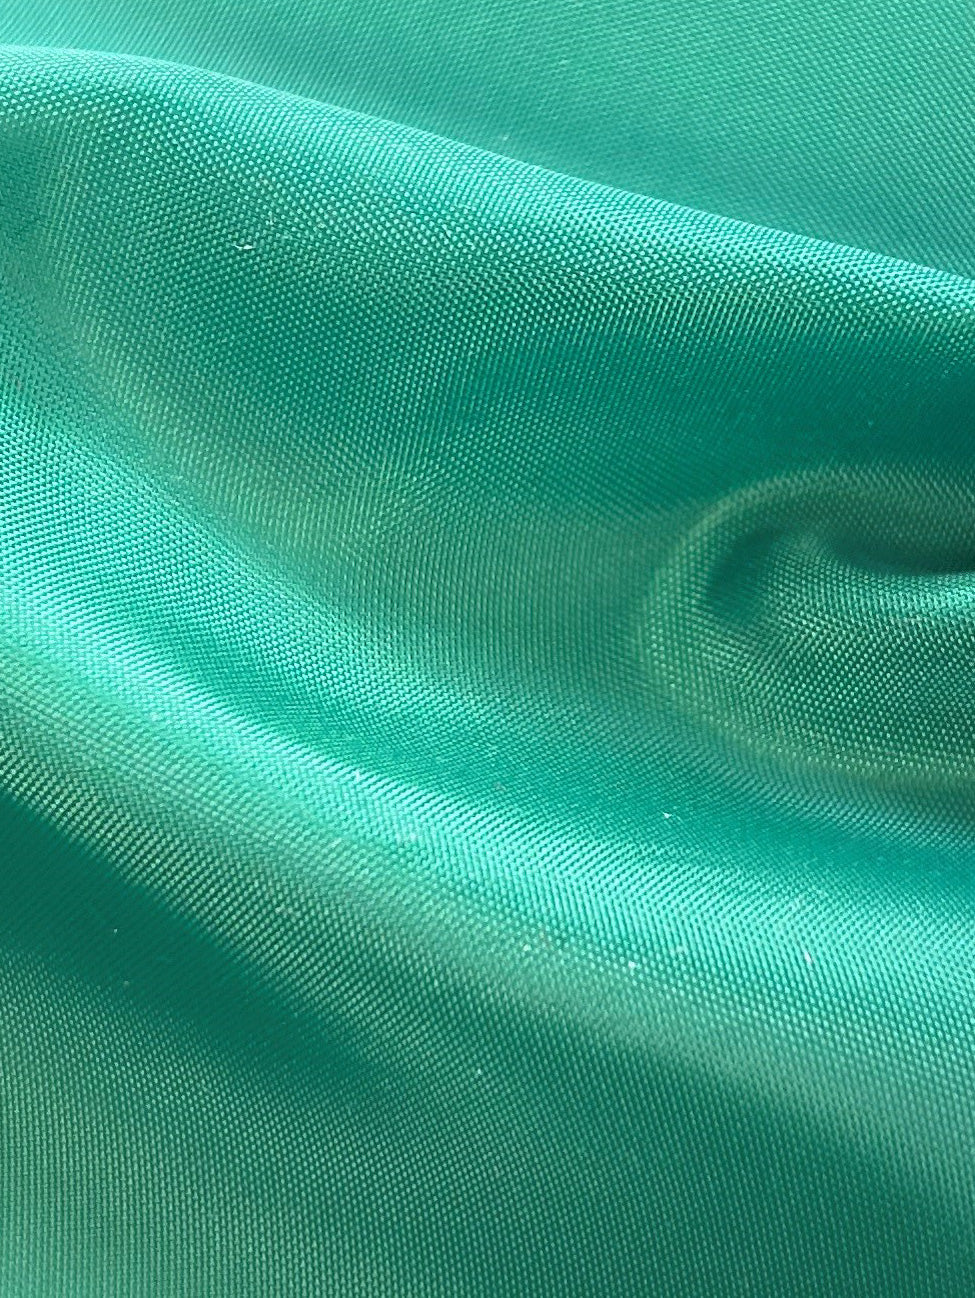 Peacock Polyester Lining Fabric - Eclipse